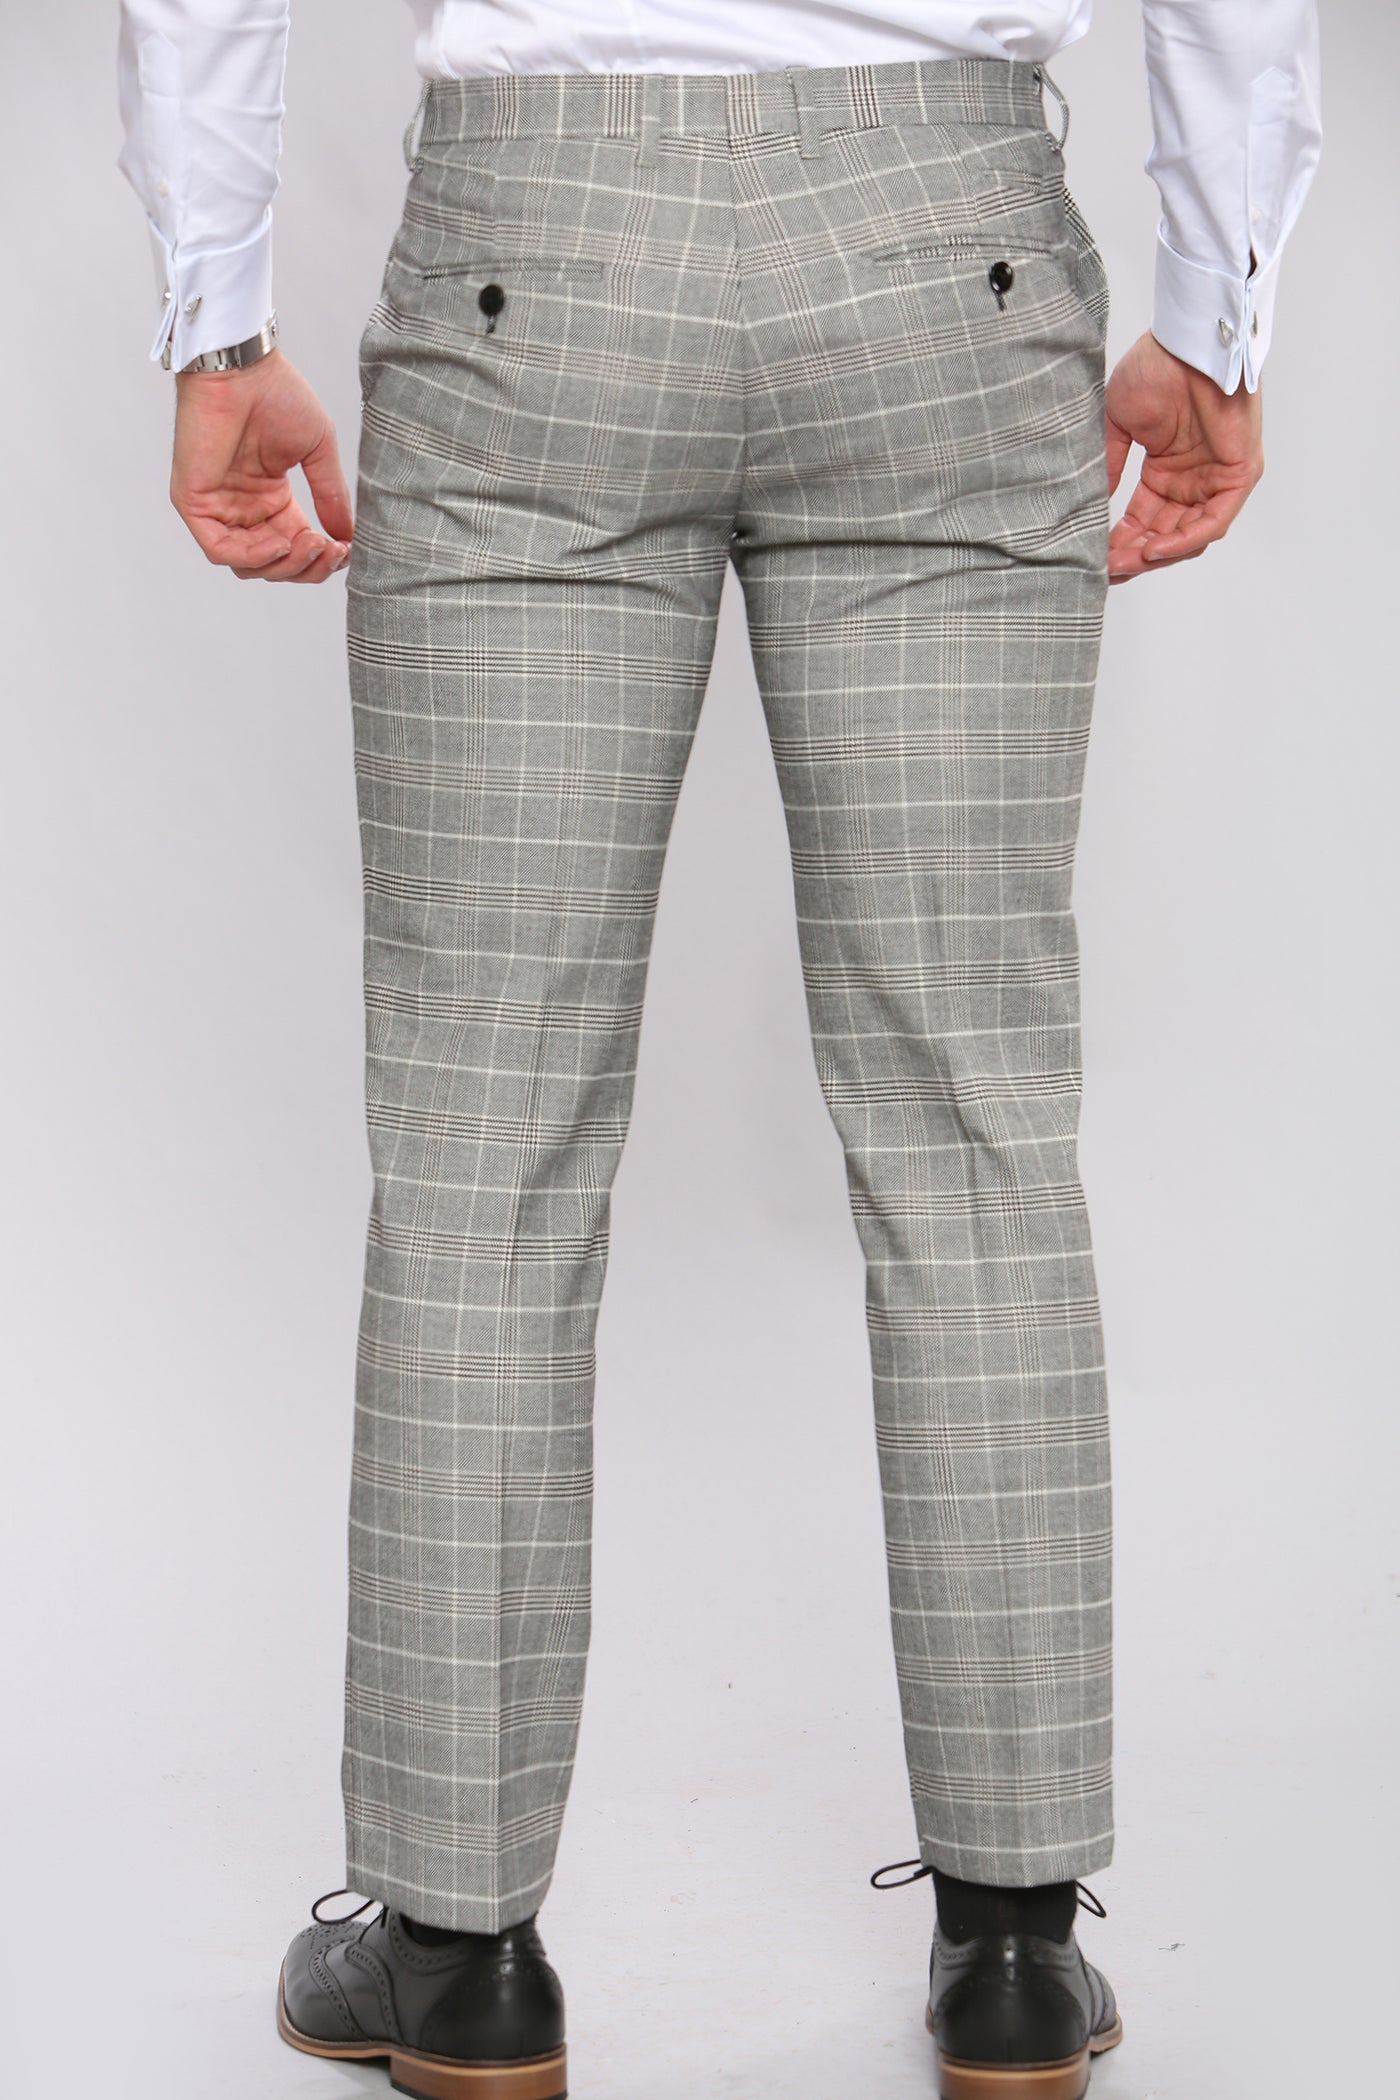 ROSS - Grey Check Trousers